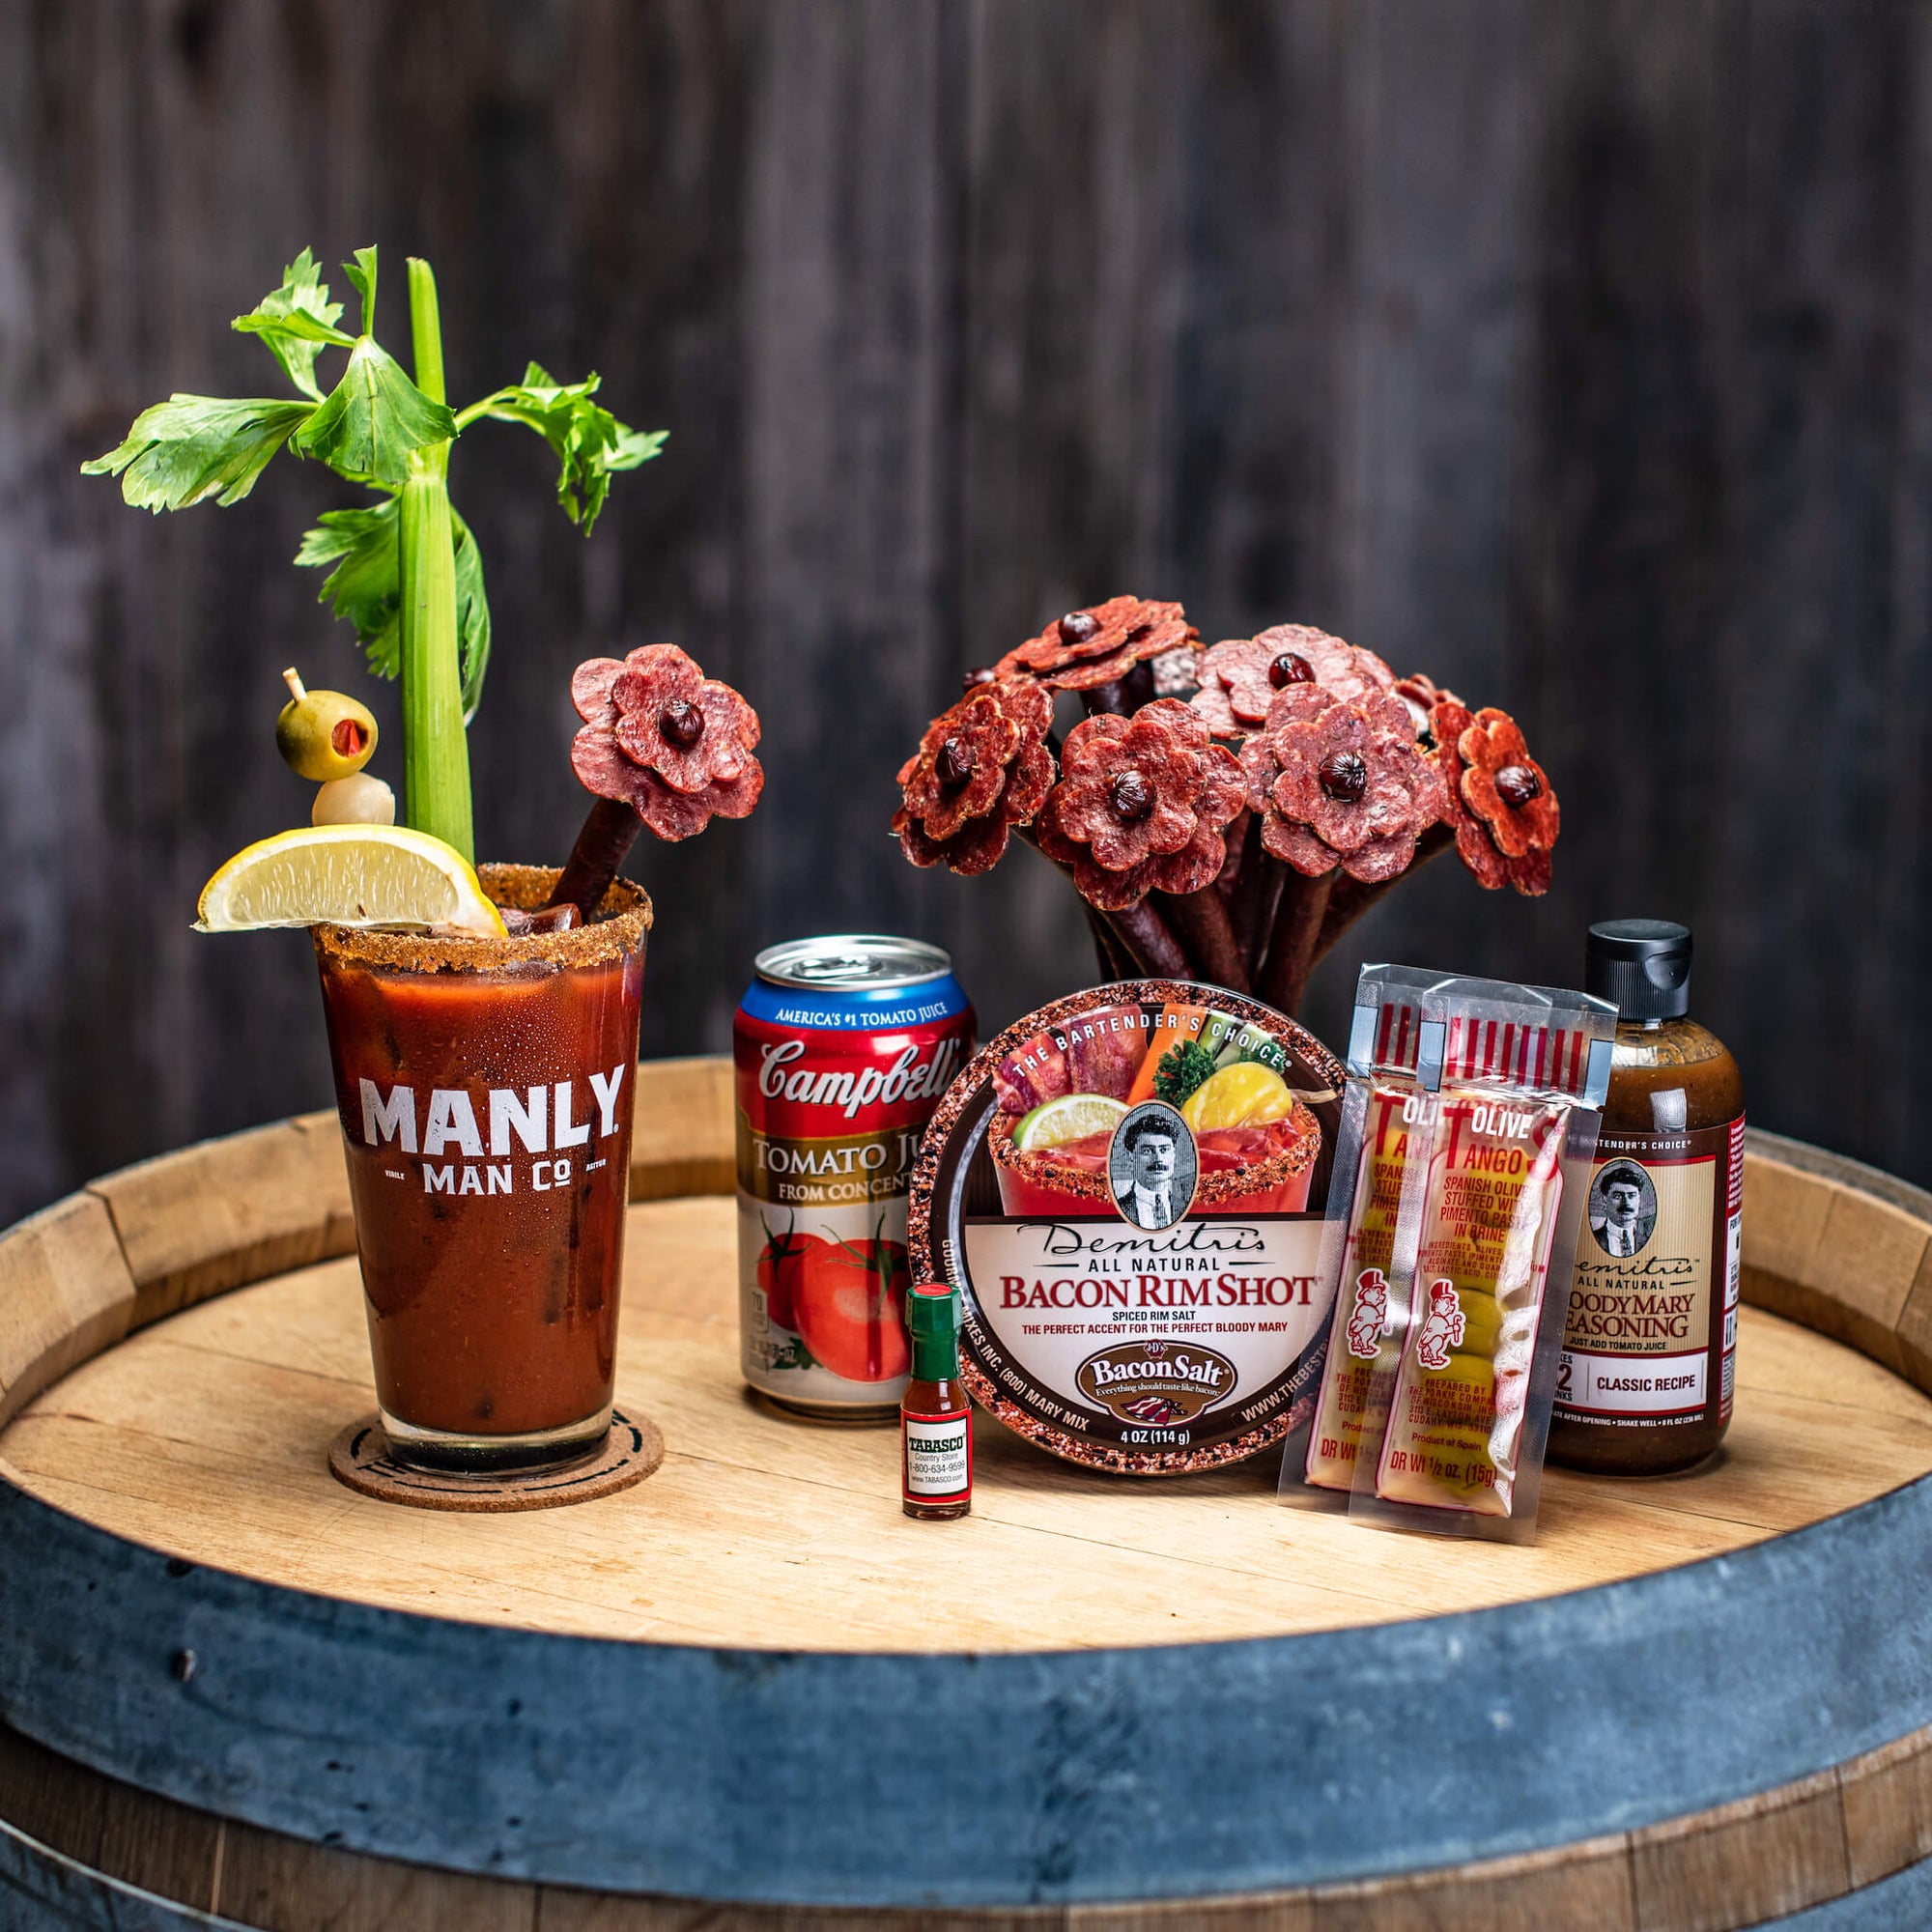 The Bloody Mary Kit